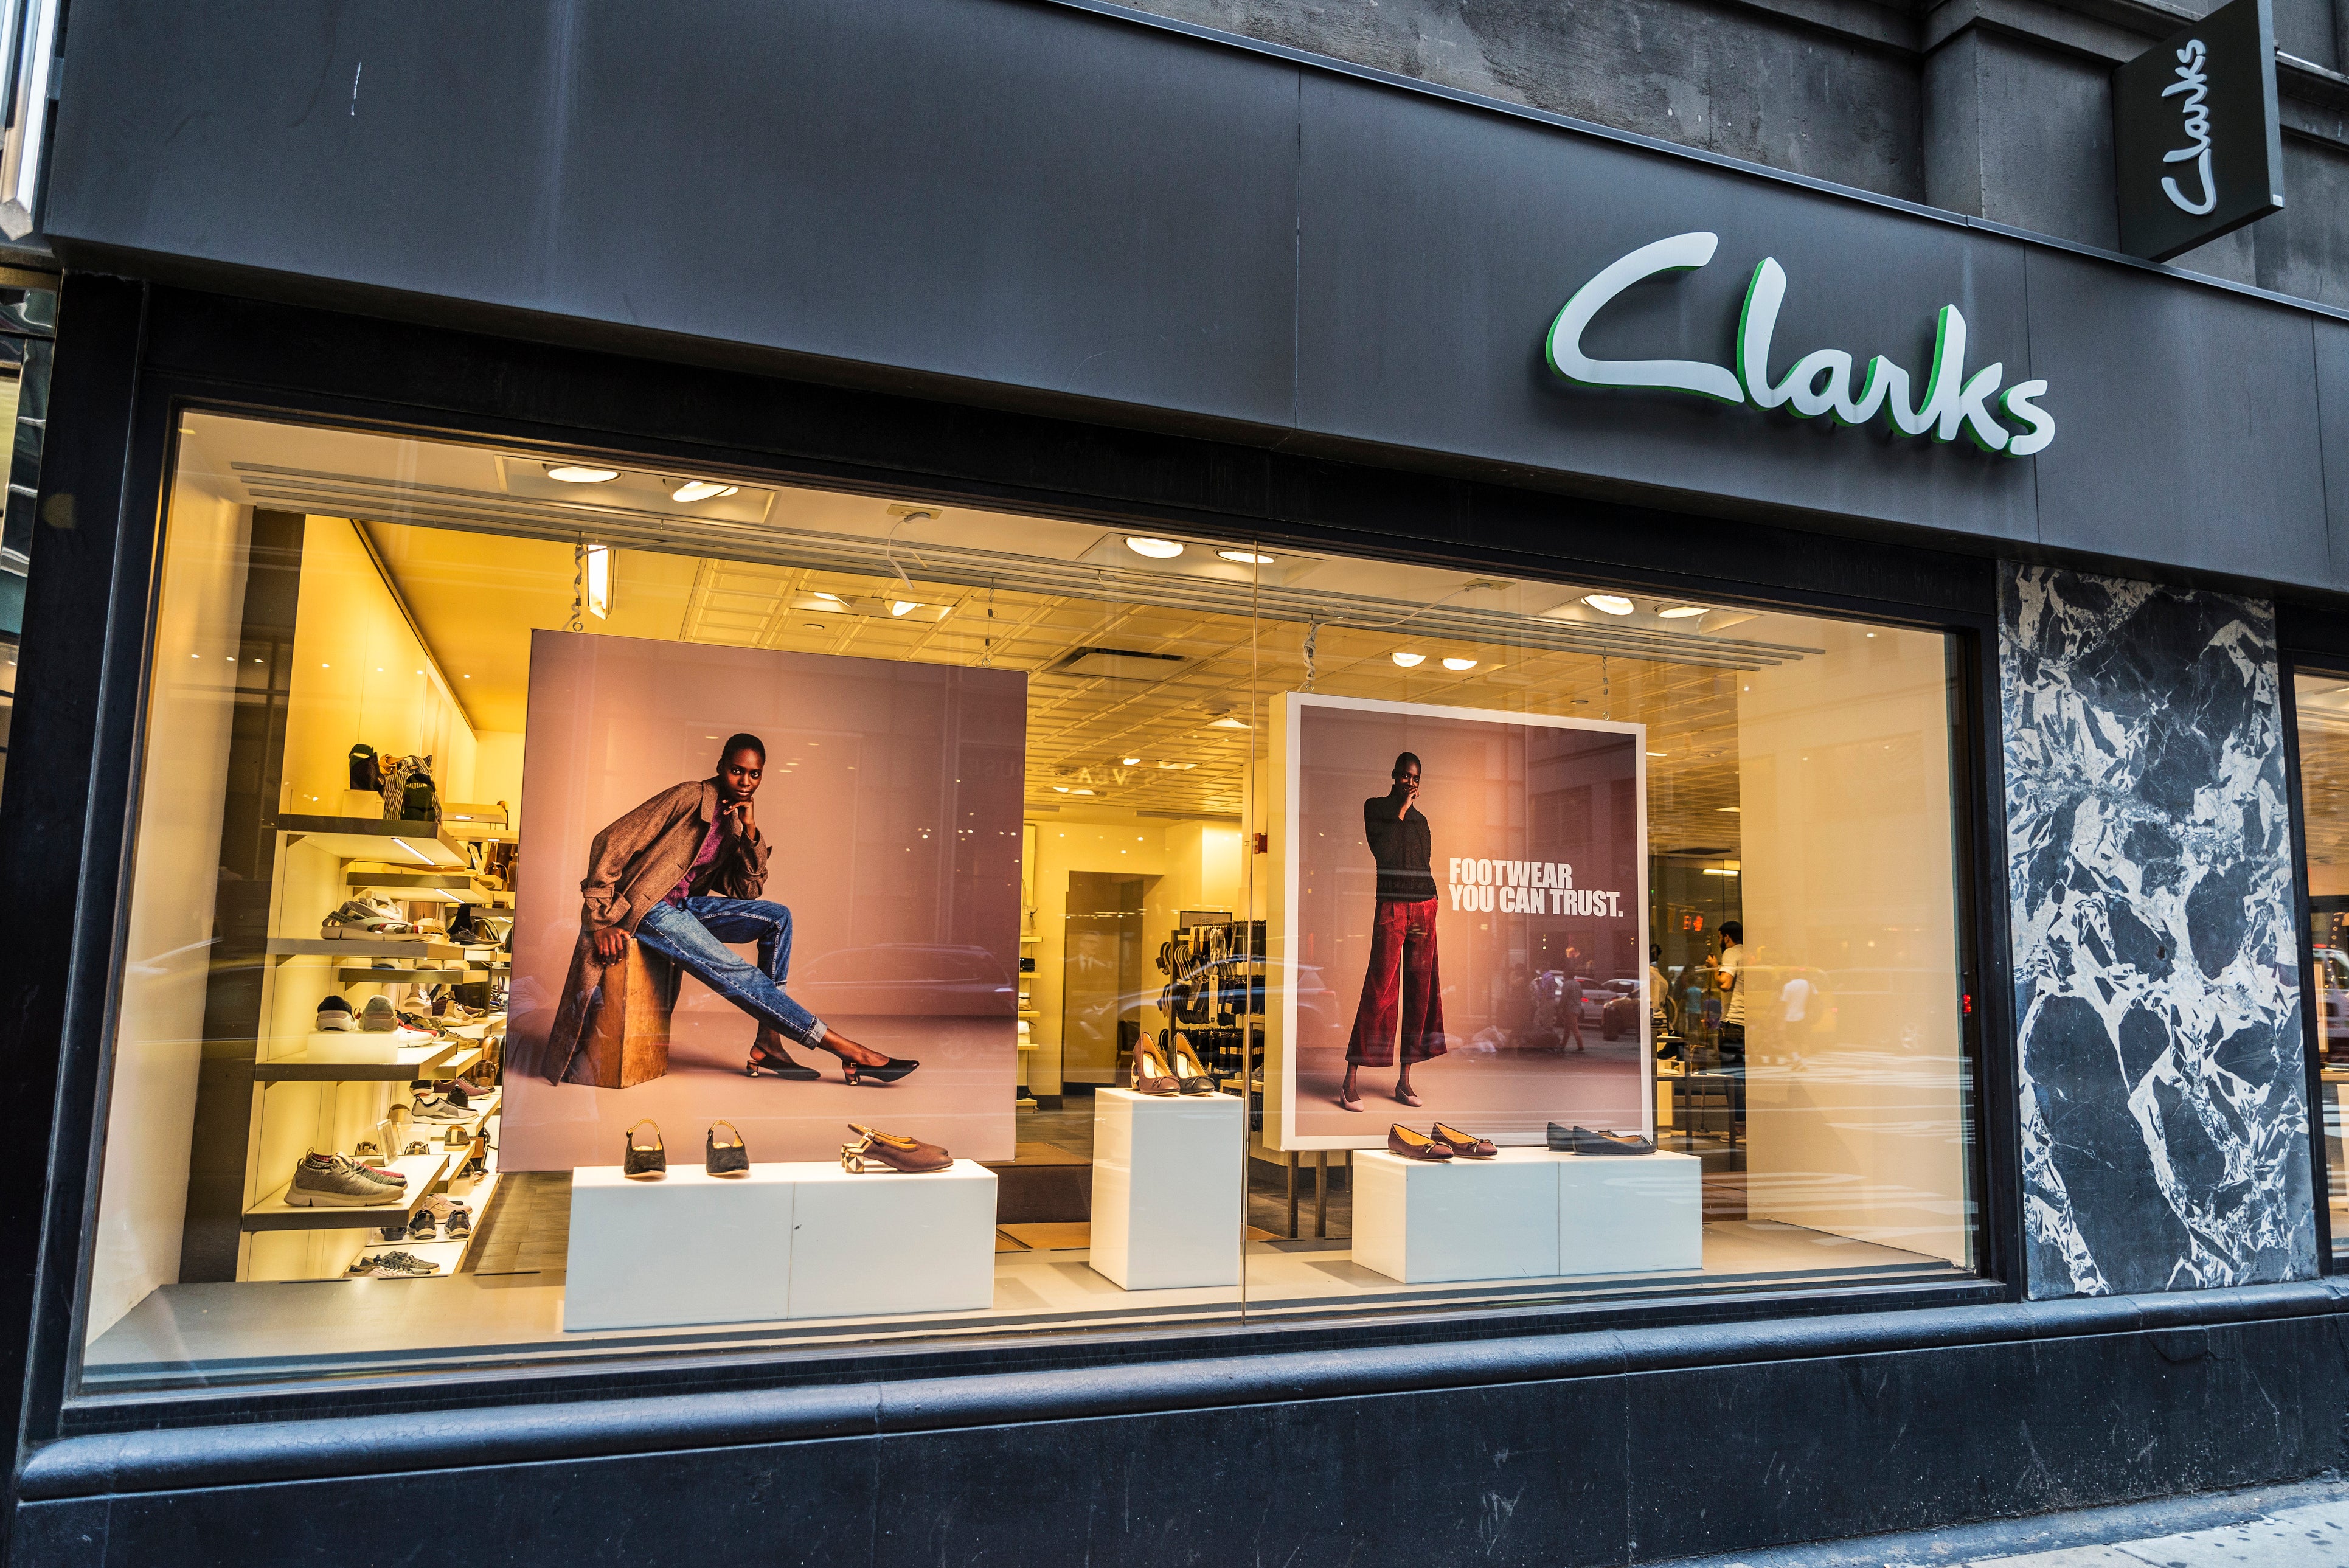 Jessica Hall was told by an assistant at Clarks in Epsom, Surrey, that ‘if we could guarantee we would be purchasing shoes, then they would assist…’